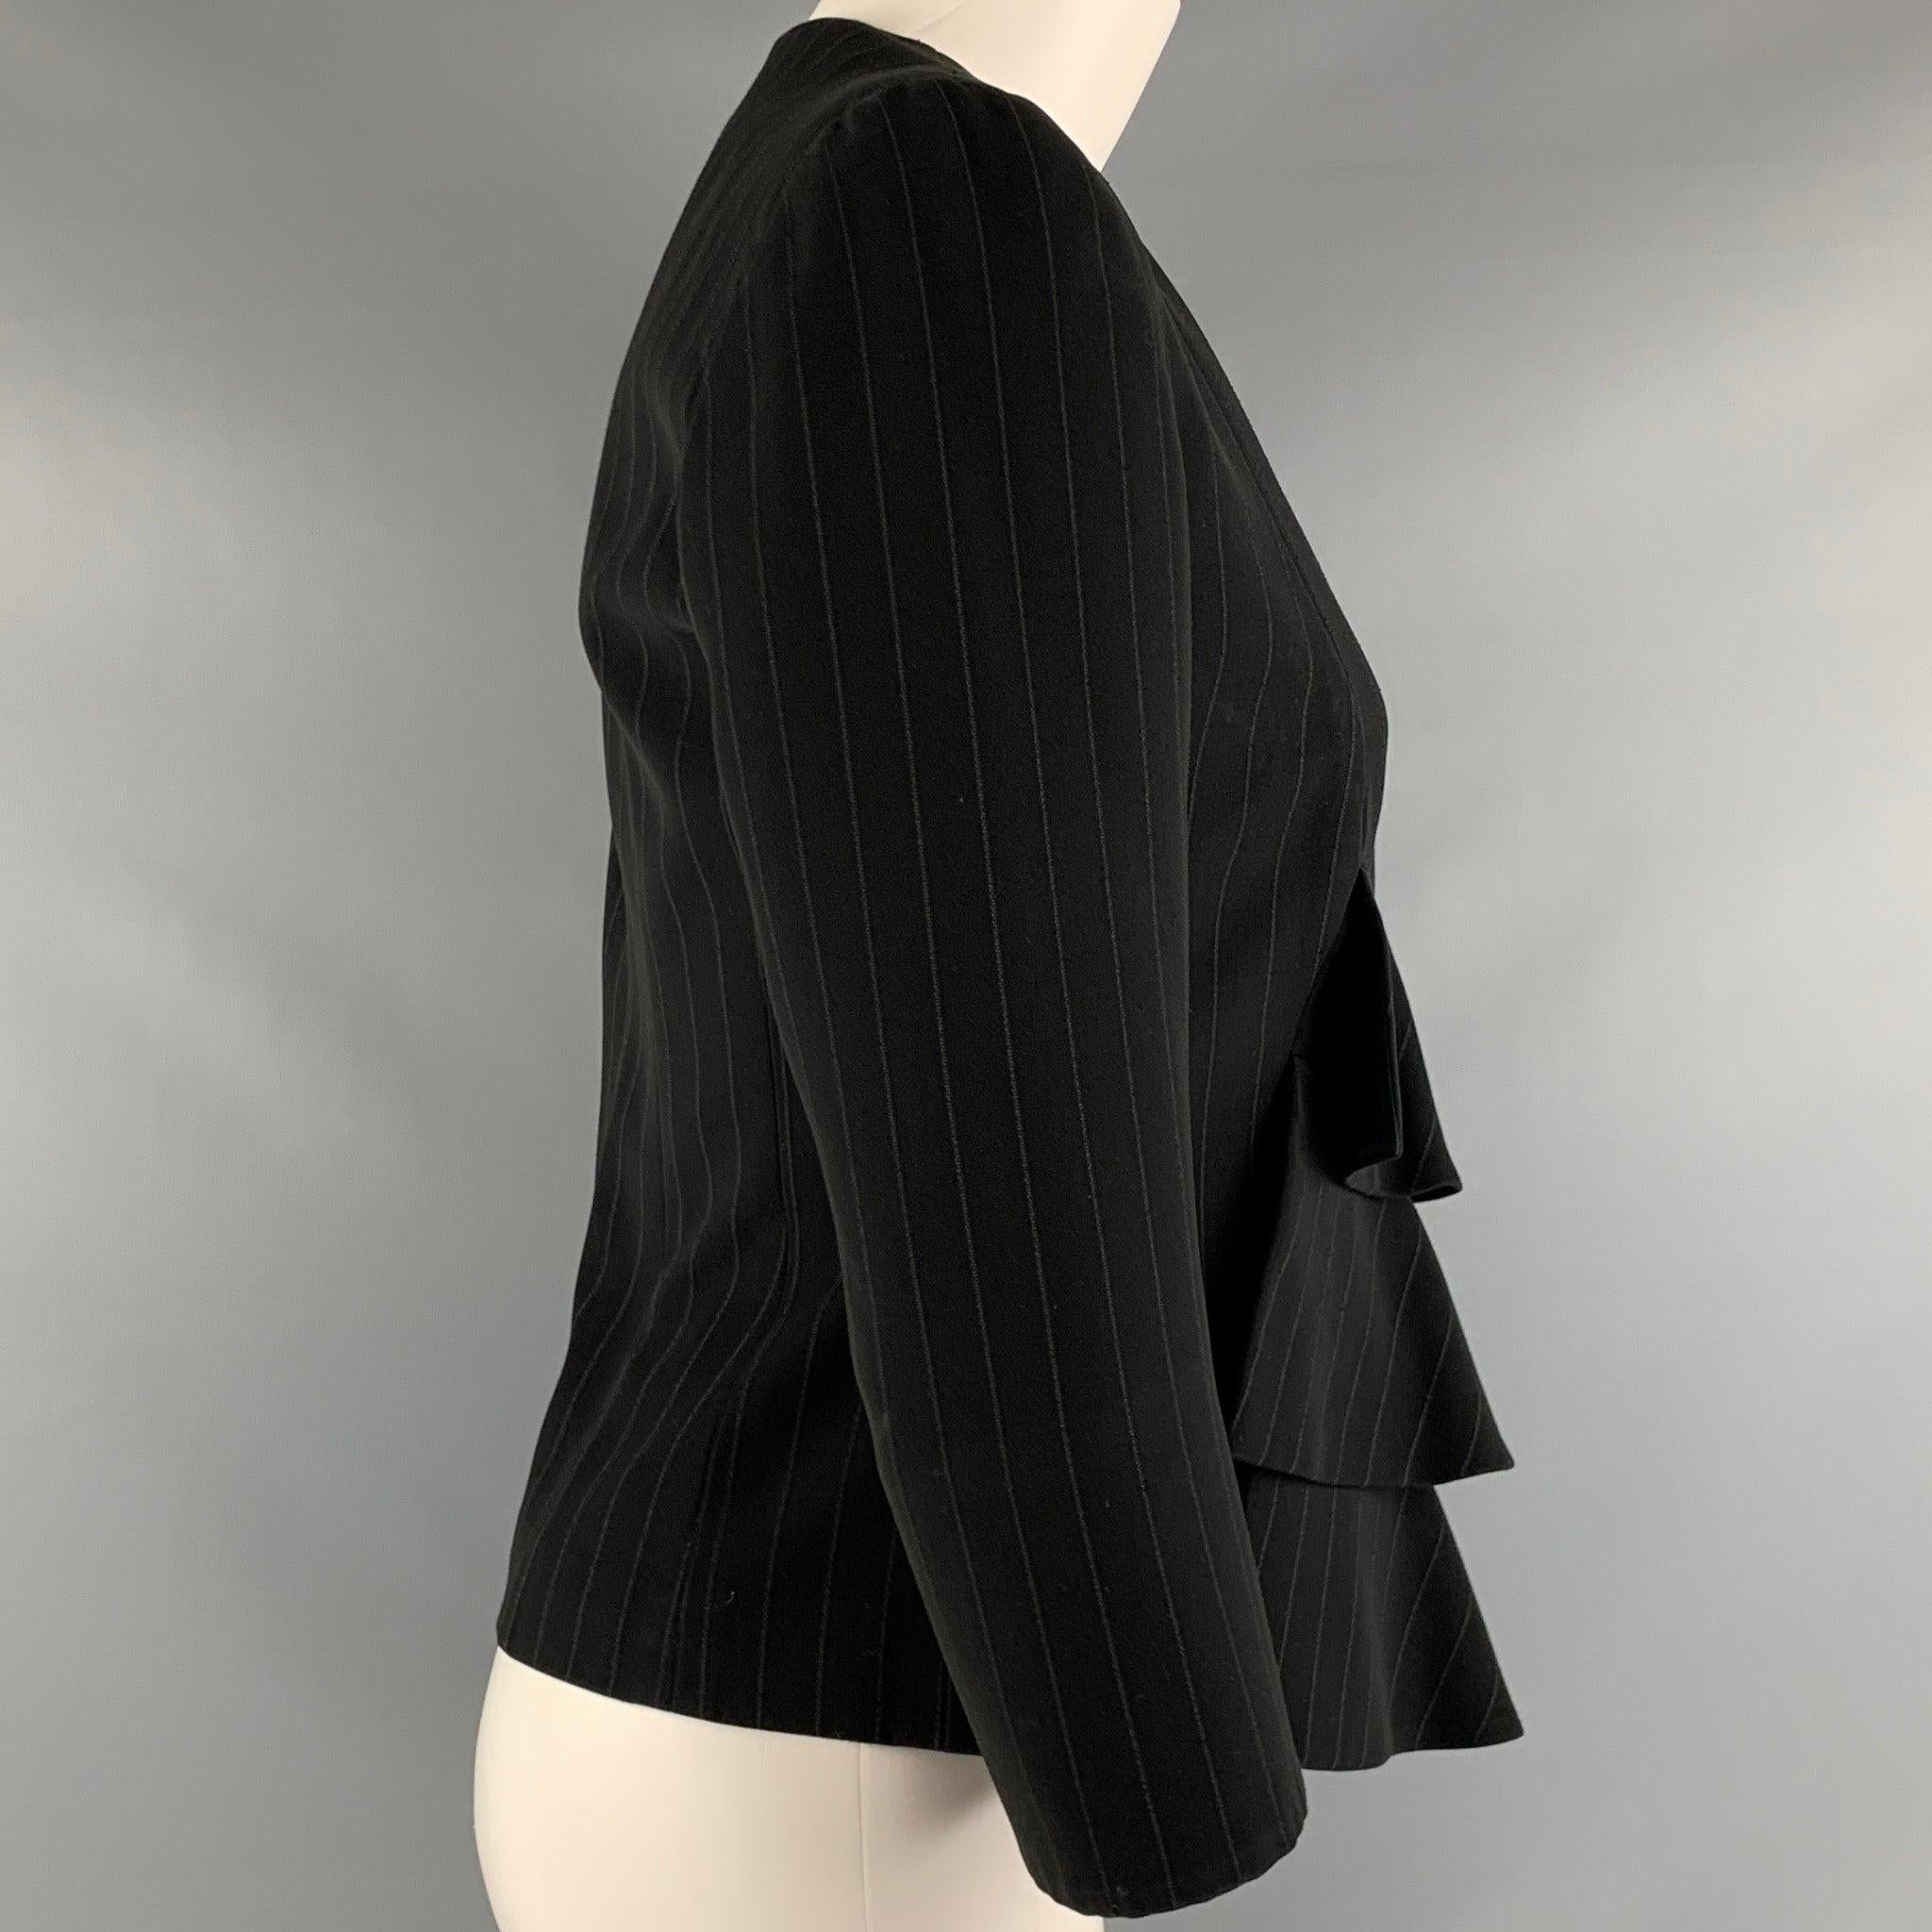 GIORGIO ARMANI
blazer in a black fabric featuring a ruffle front, pinstripe pattern, 3/4 sleeves, and snap button closure. Made in Italy.Very Good Pre-Owned Condition. Minor signs of wear. 

Marked:   38 

Measurements: 
 
Shoulder: 14 inches  Bust: